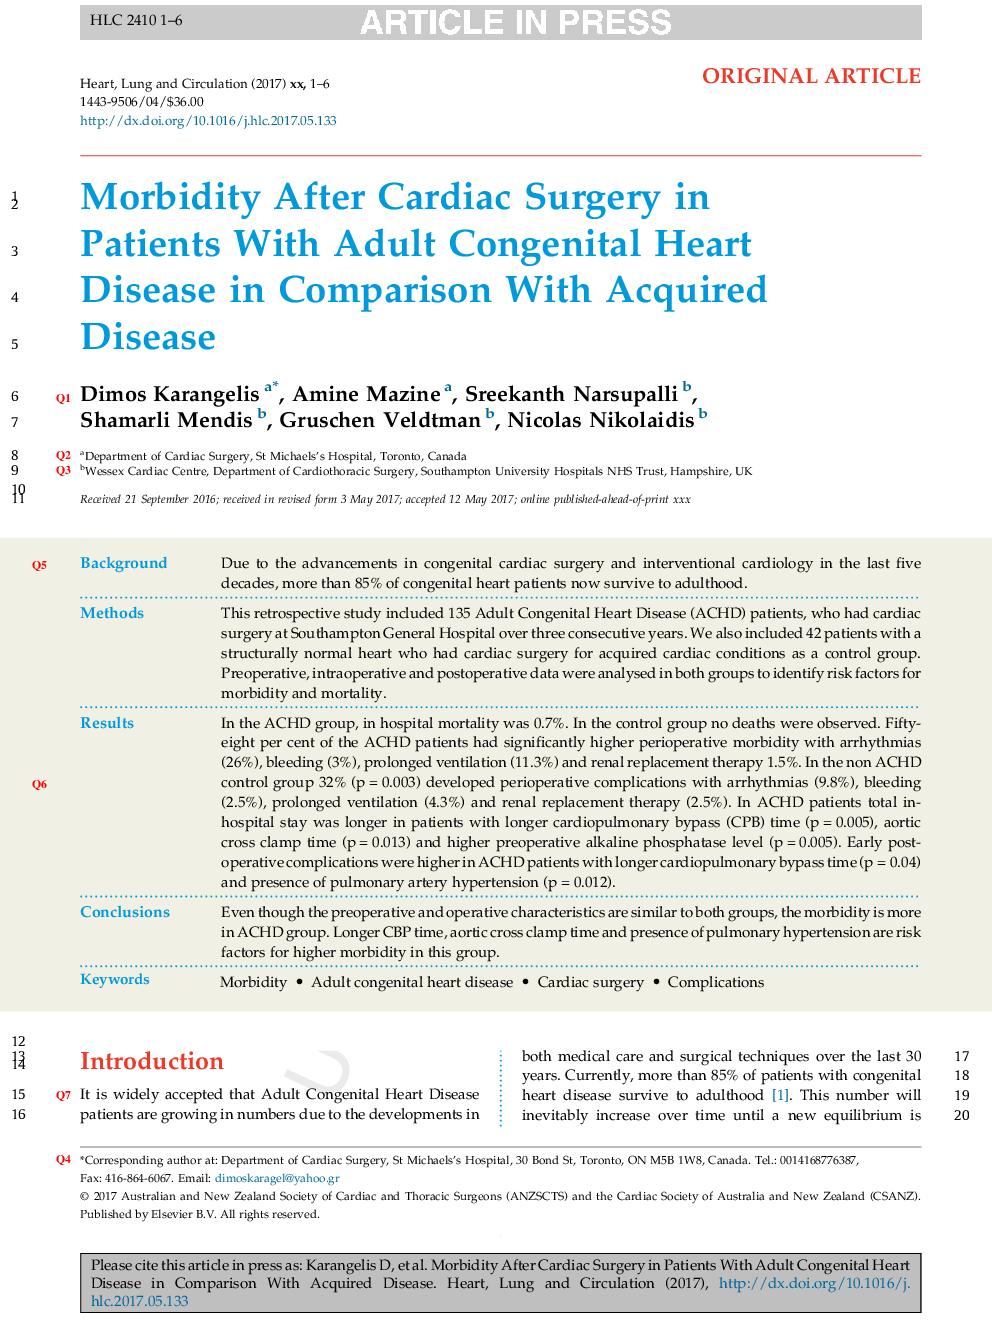 Morbidity After Cardiac Surgery in Patients With Adult Congenital Heart Disease in Comparison With Acquired Disease